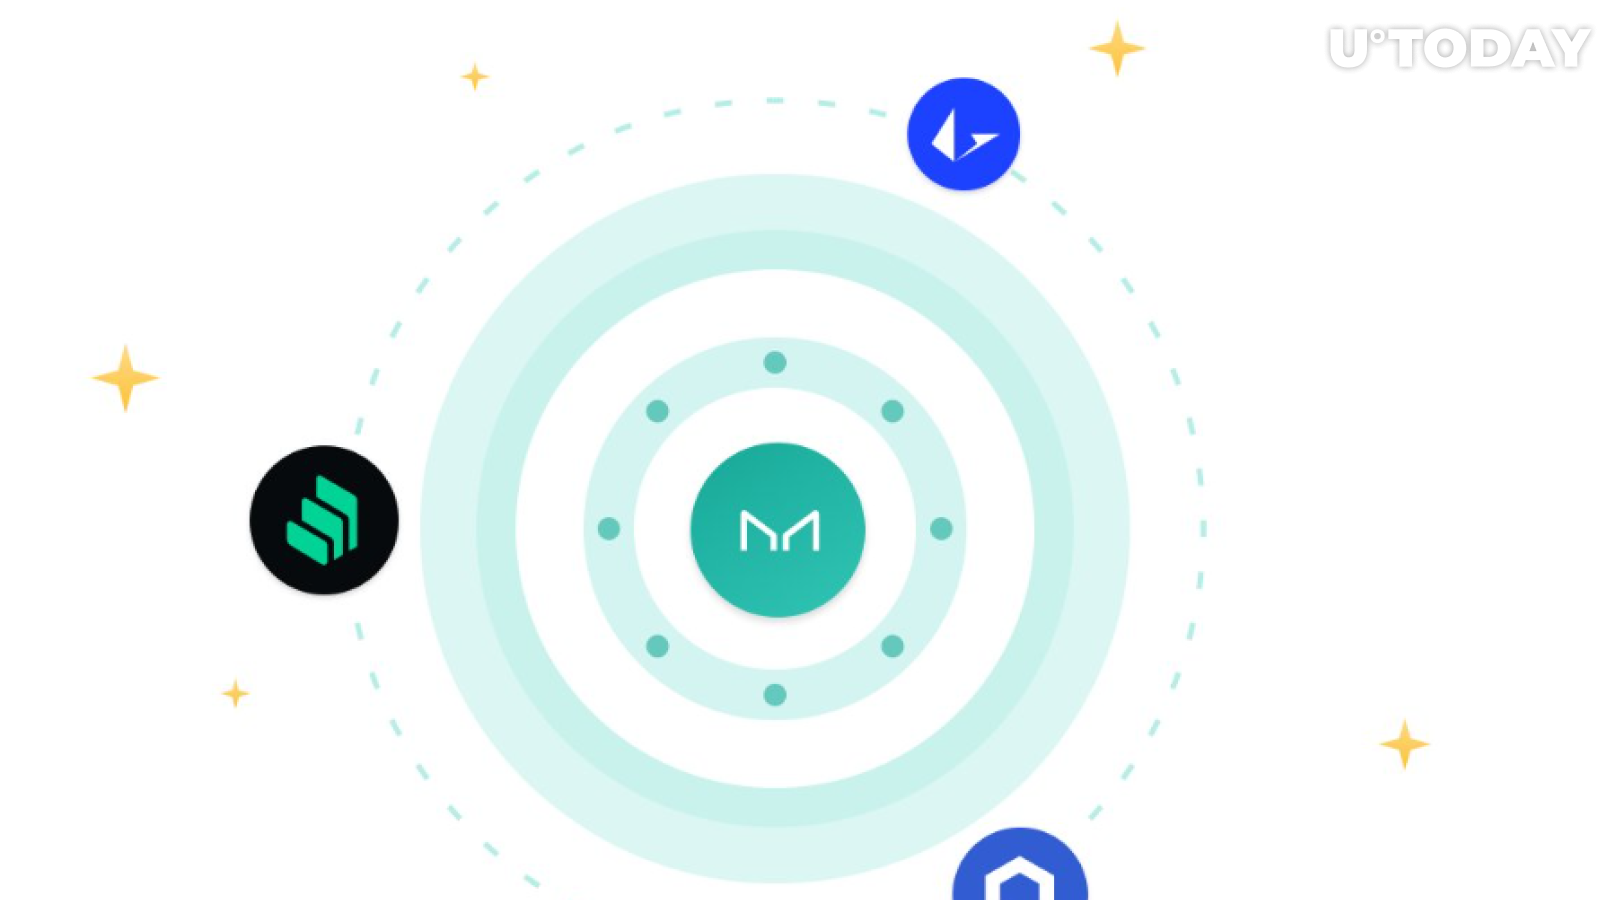 Maker Adds Loopring (LRC), Compound (COMP), and Chainlink (LINK) as Collateral 